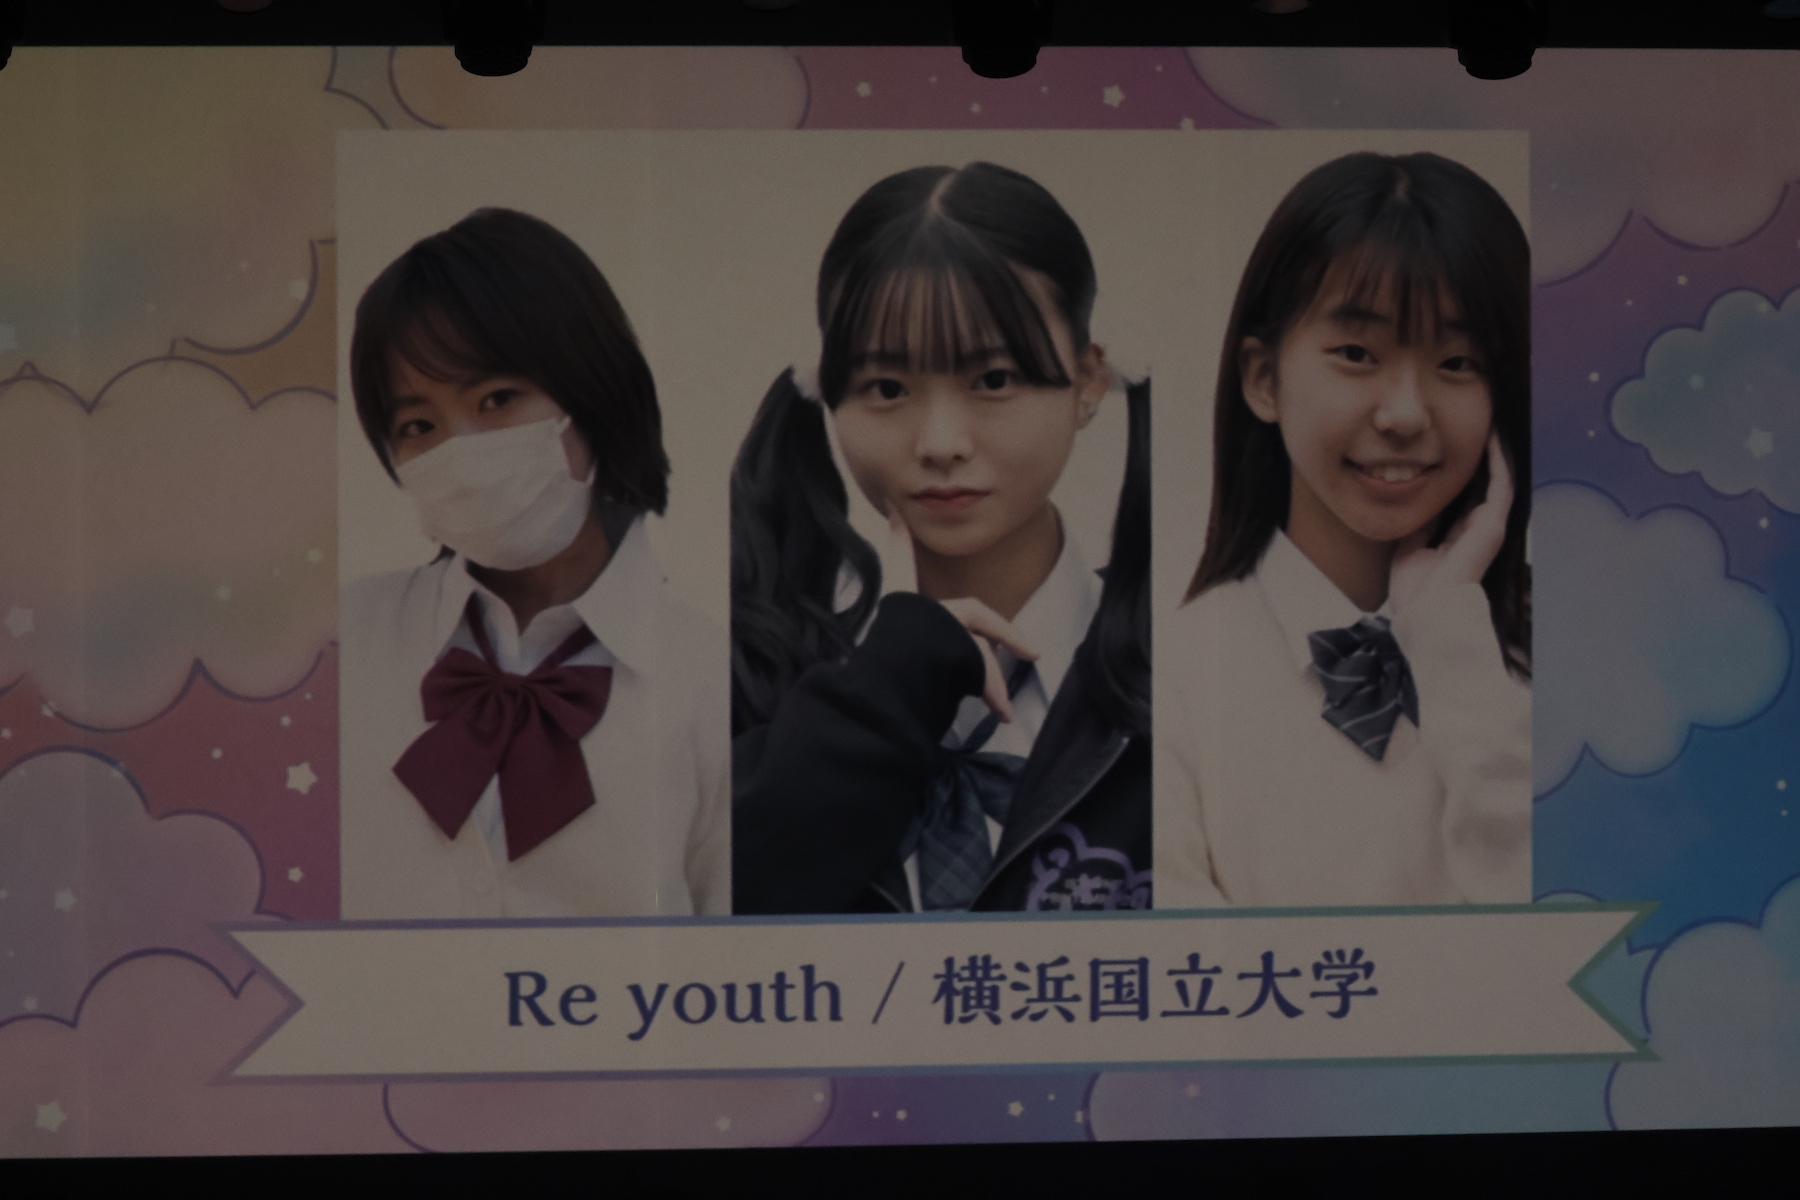 Re youth（横浜国立大学）